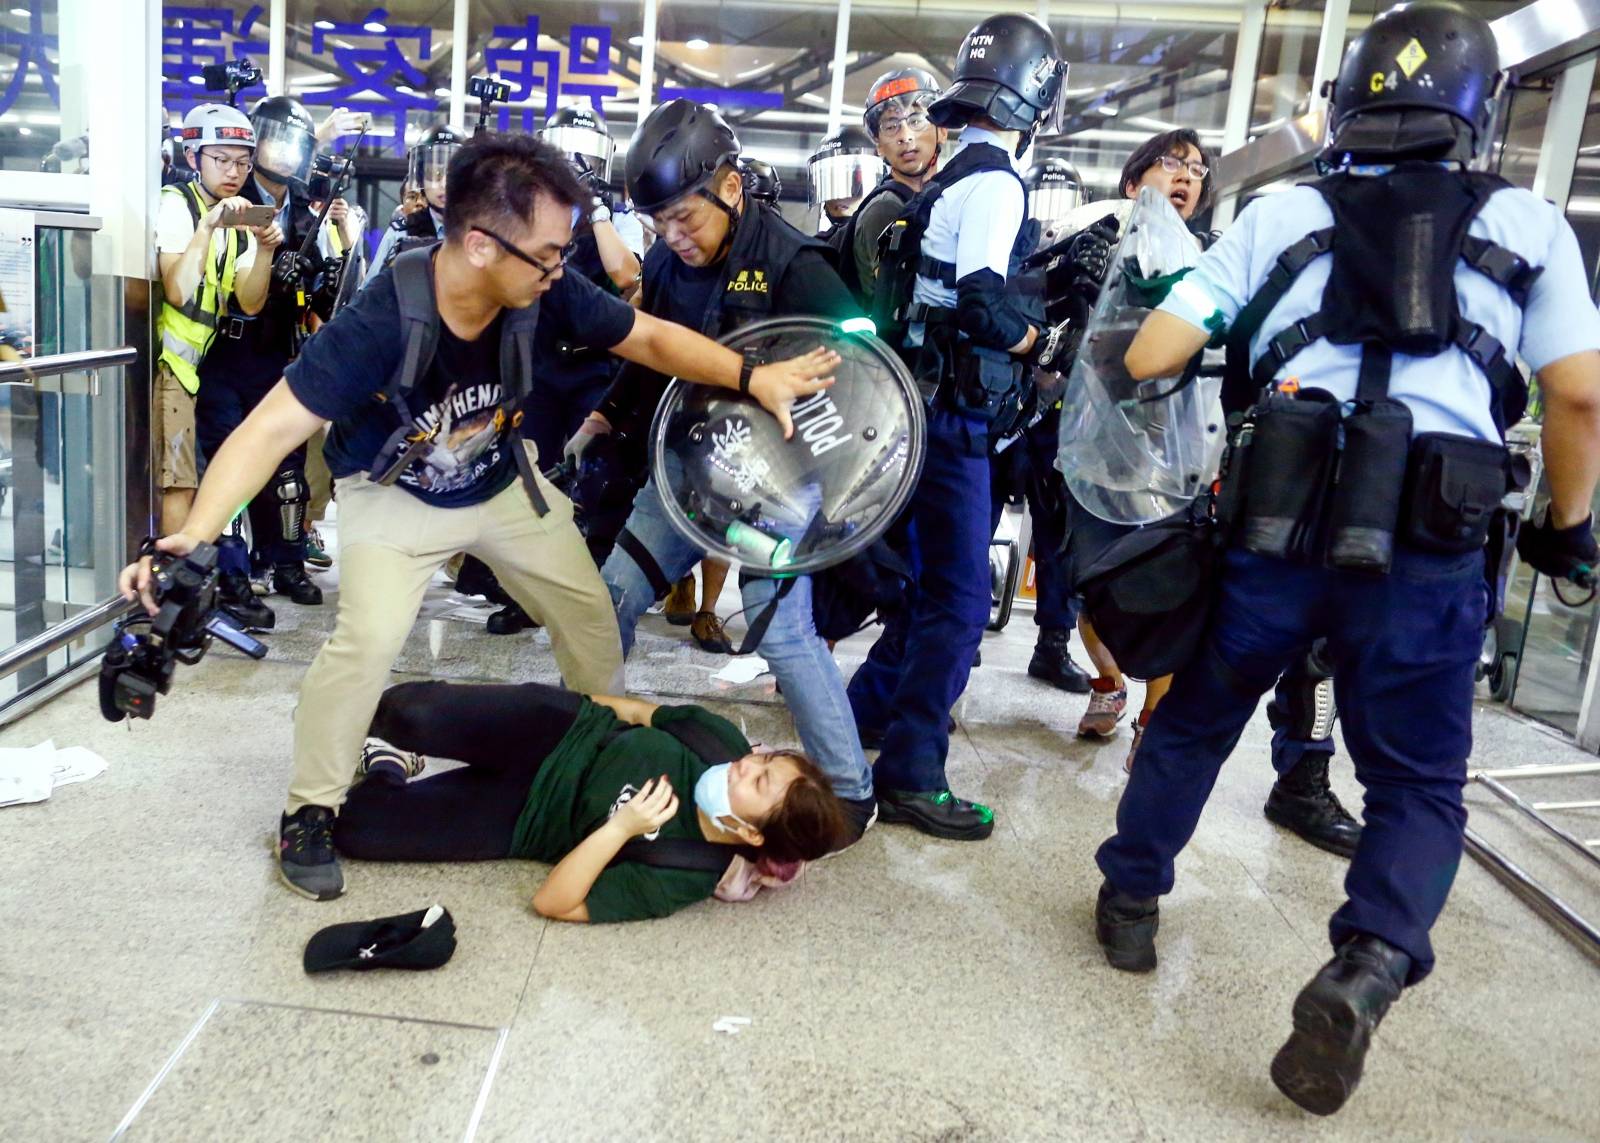 Riot police disperse anti-extradition bill protesters during a mass demonstration after a woman was shot in the eye, at the Hong Kong international airport, in Hong Kong